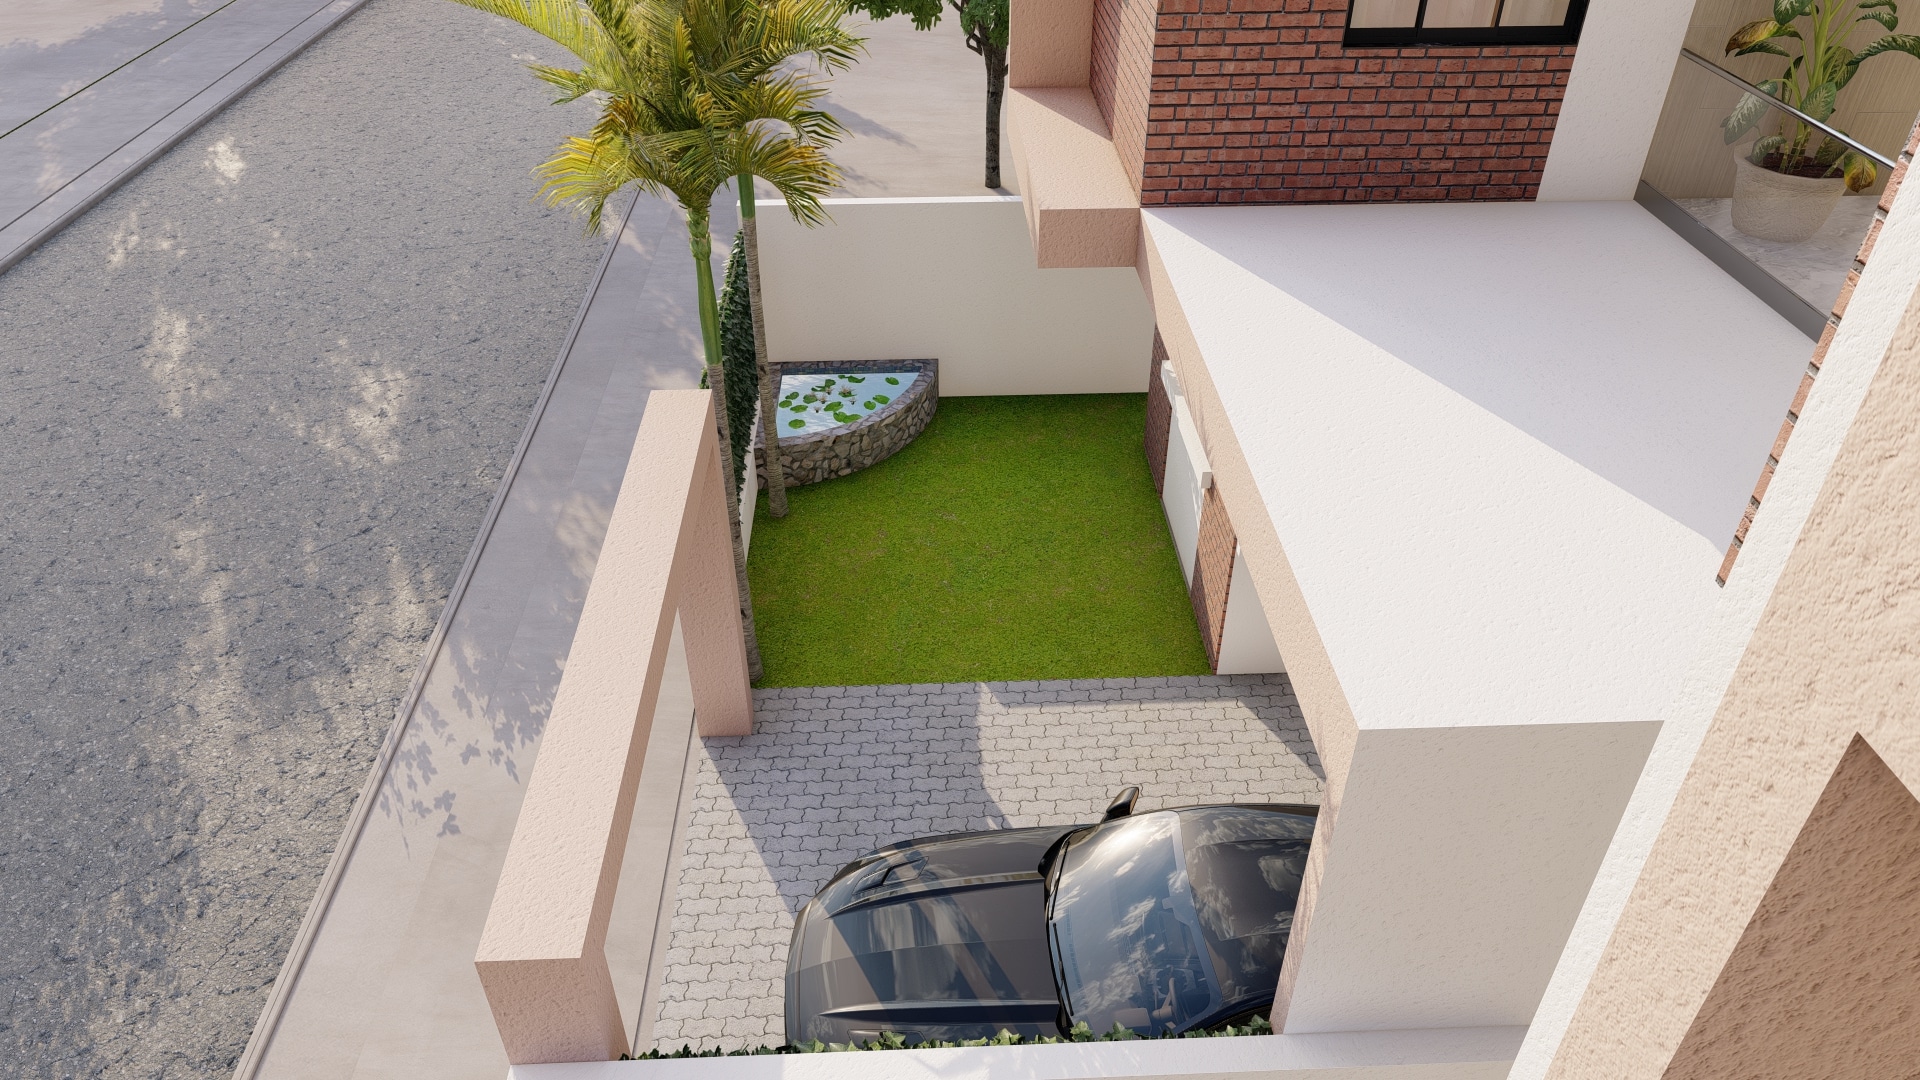 enterance of best villa home layout design by urban terrace east facing 30x60 sq ft